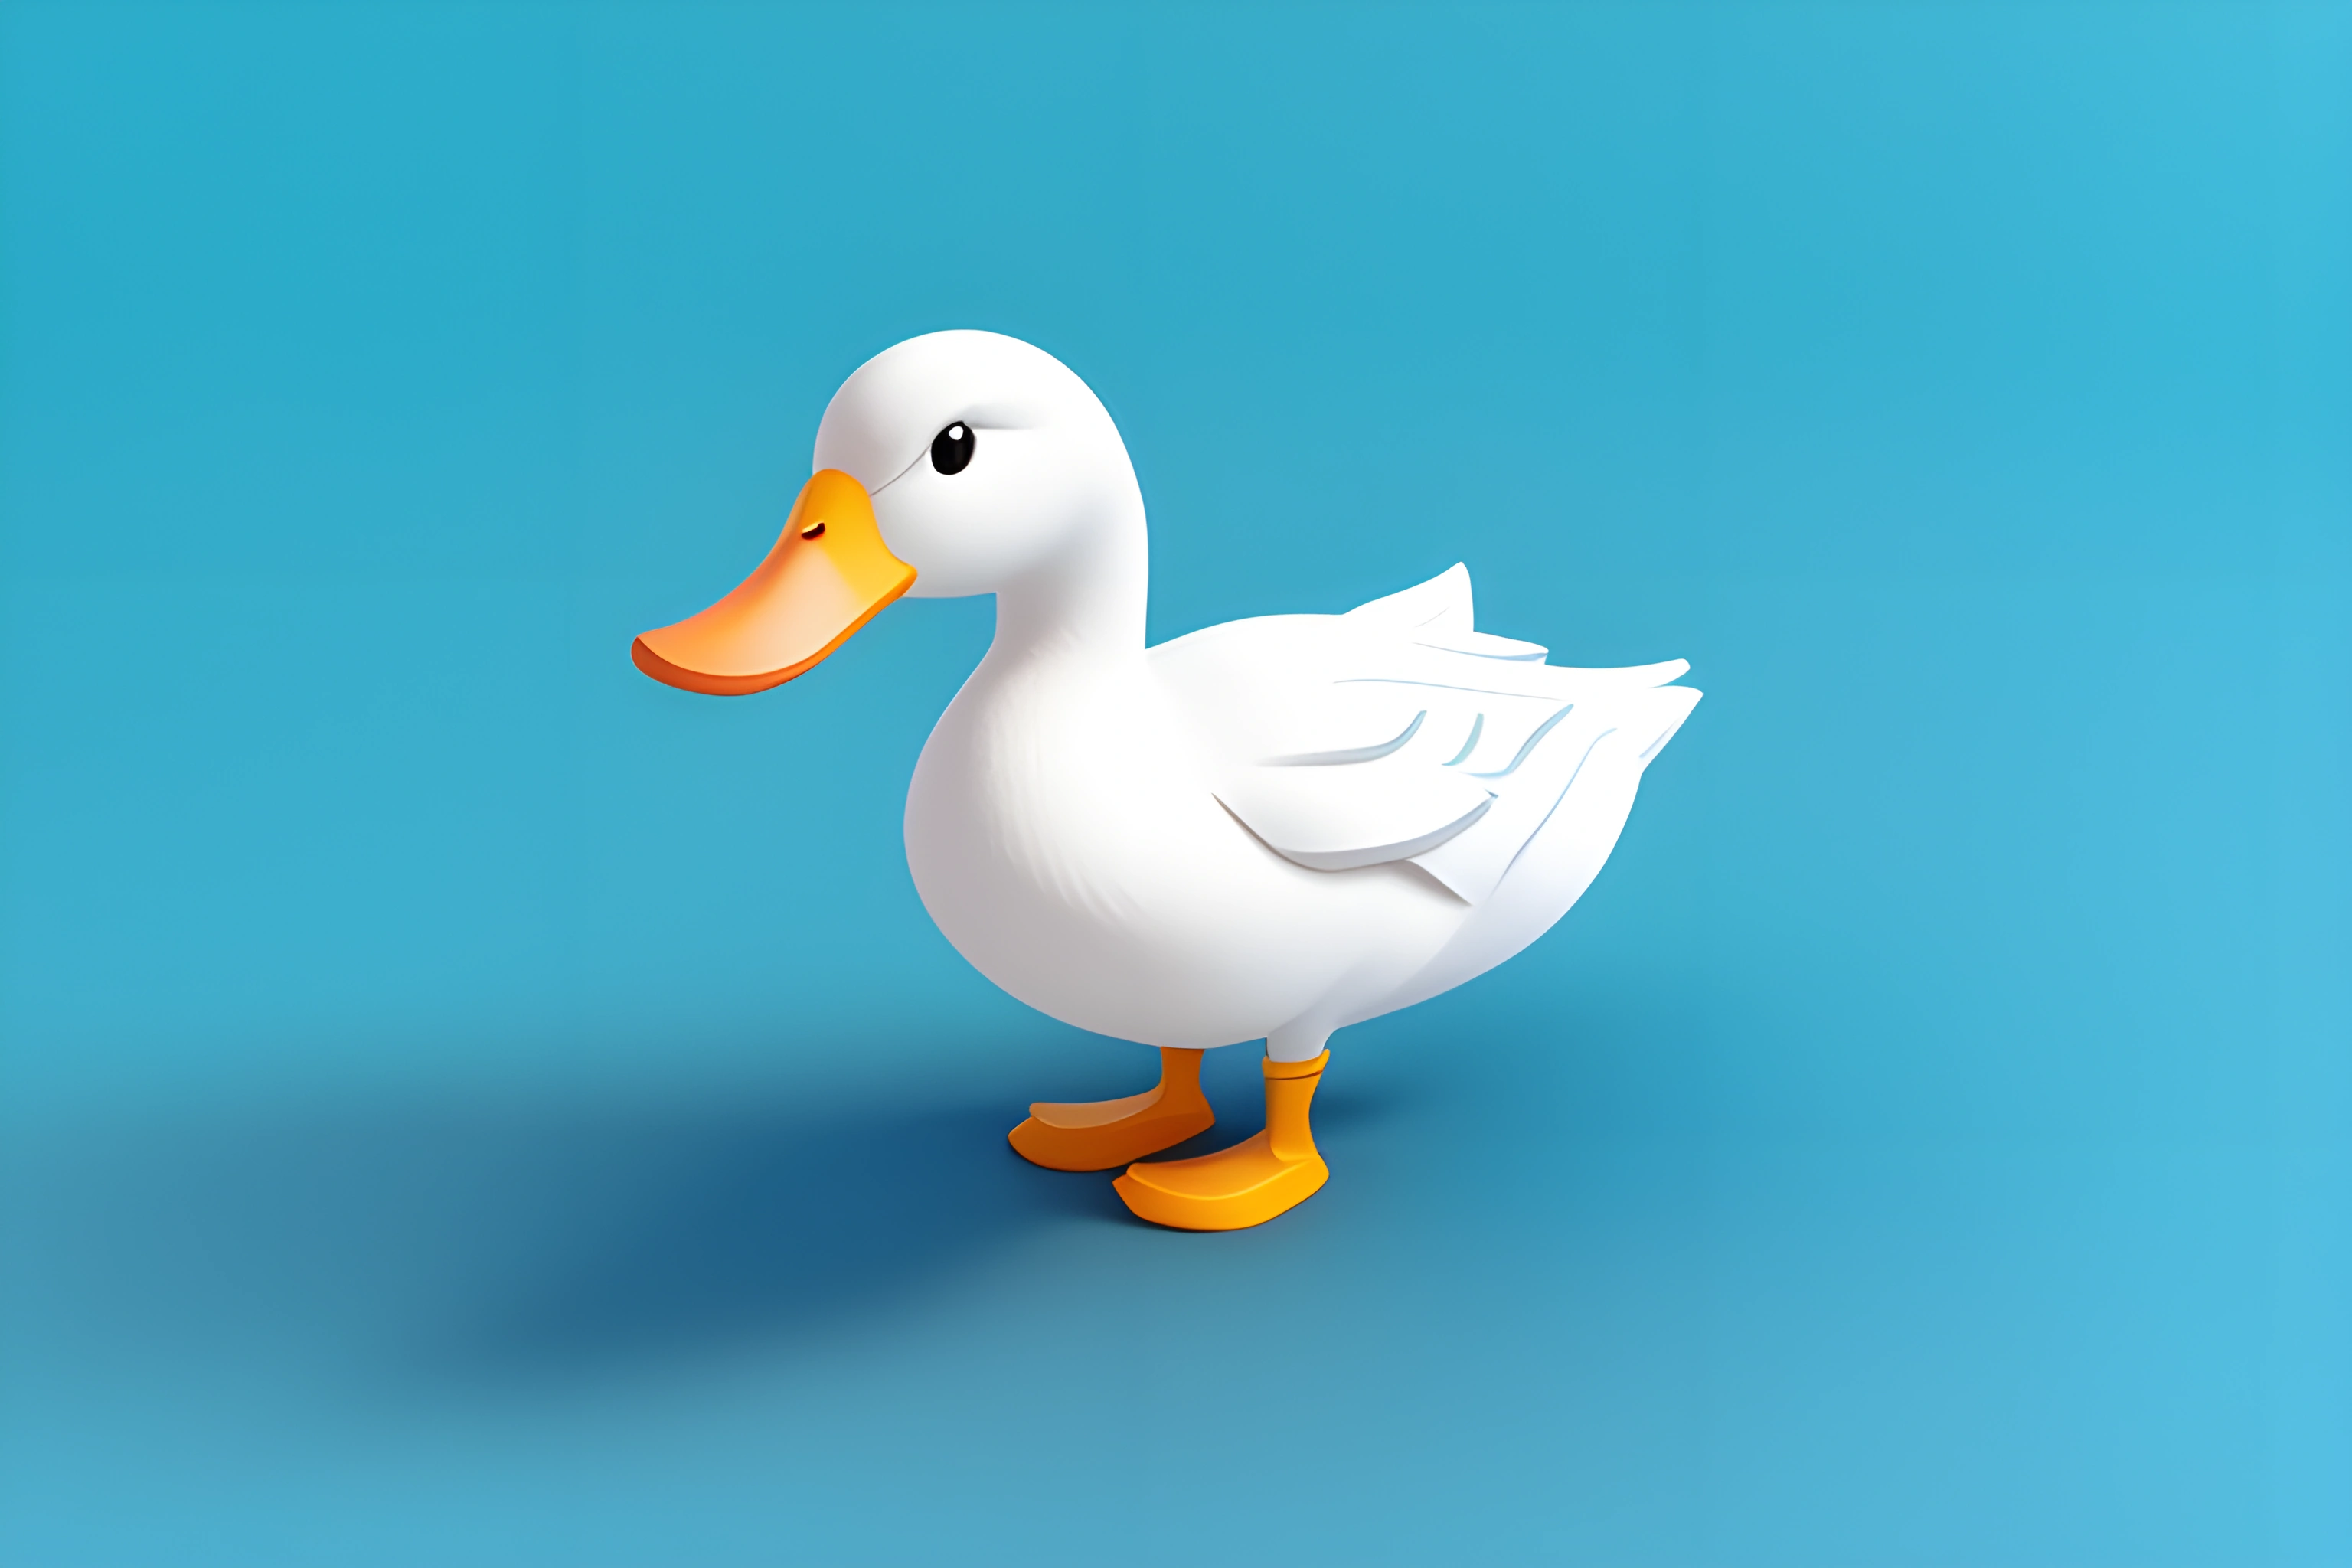 a white duck with a yellow beak standing on a blue surface